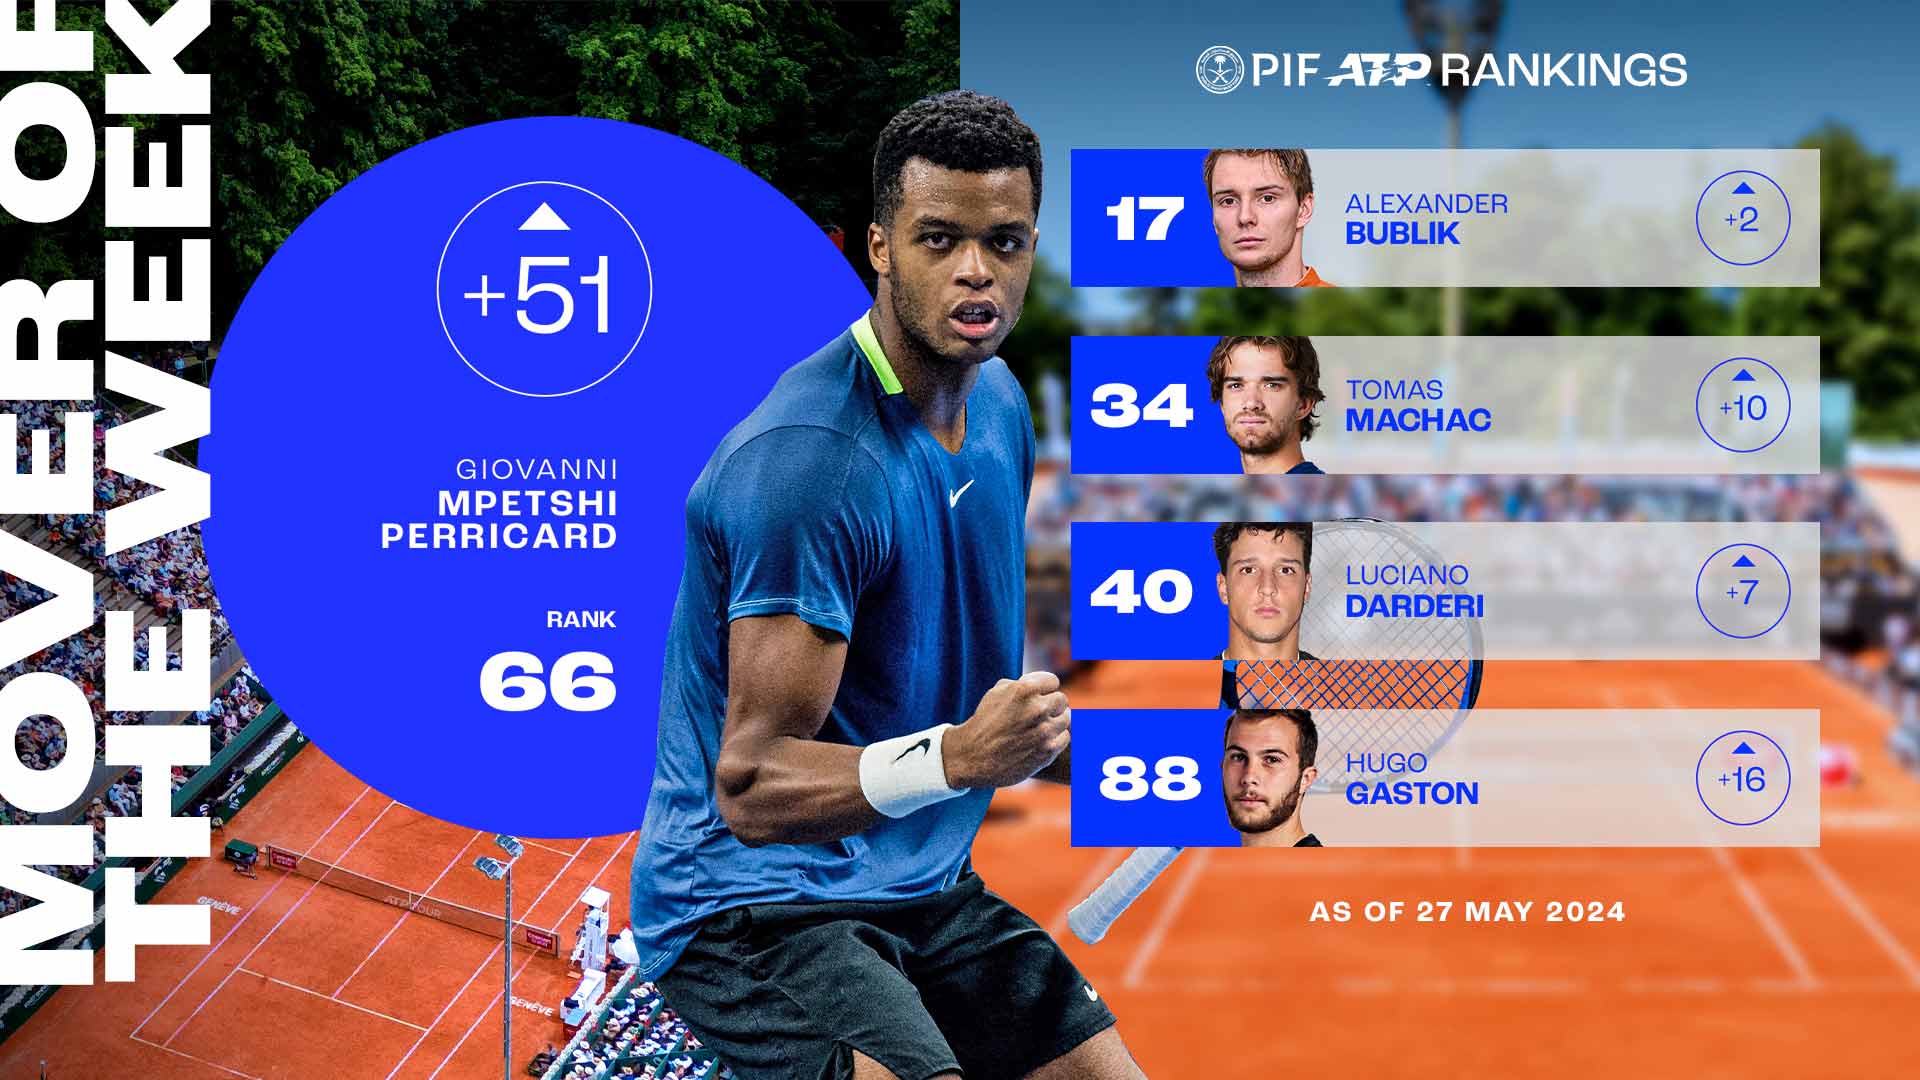 Giovanni Mpetshi Perricard climbs to No. 16 in the PIF ATP Rankings.